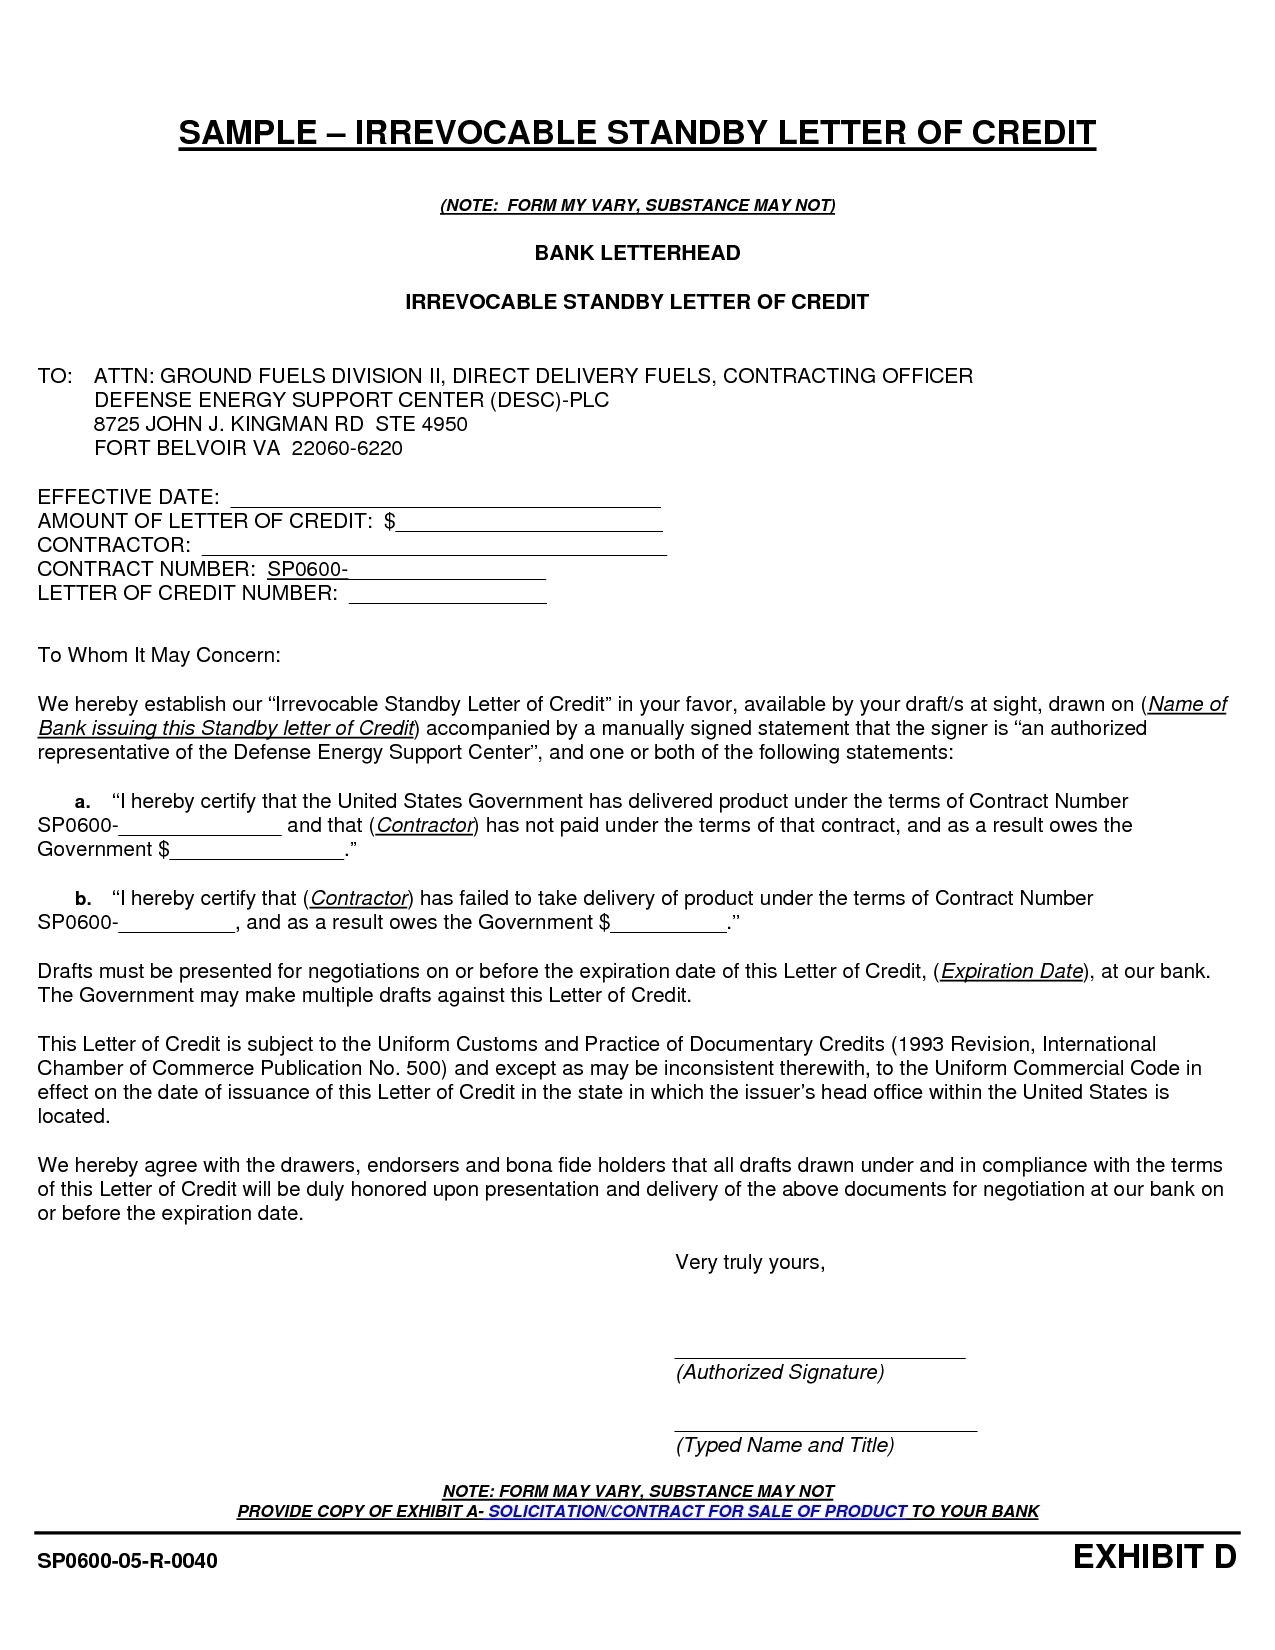 Irrevocable Standby Letter Of Credit Template - Letter Of Credit Template